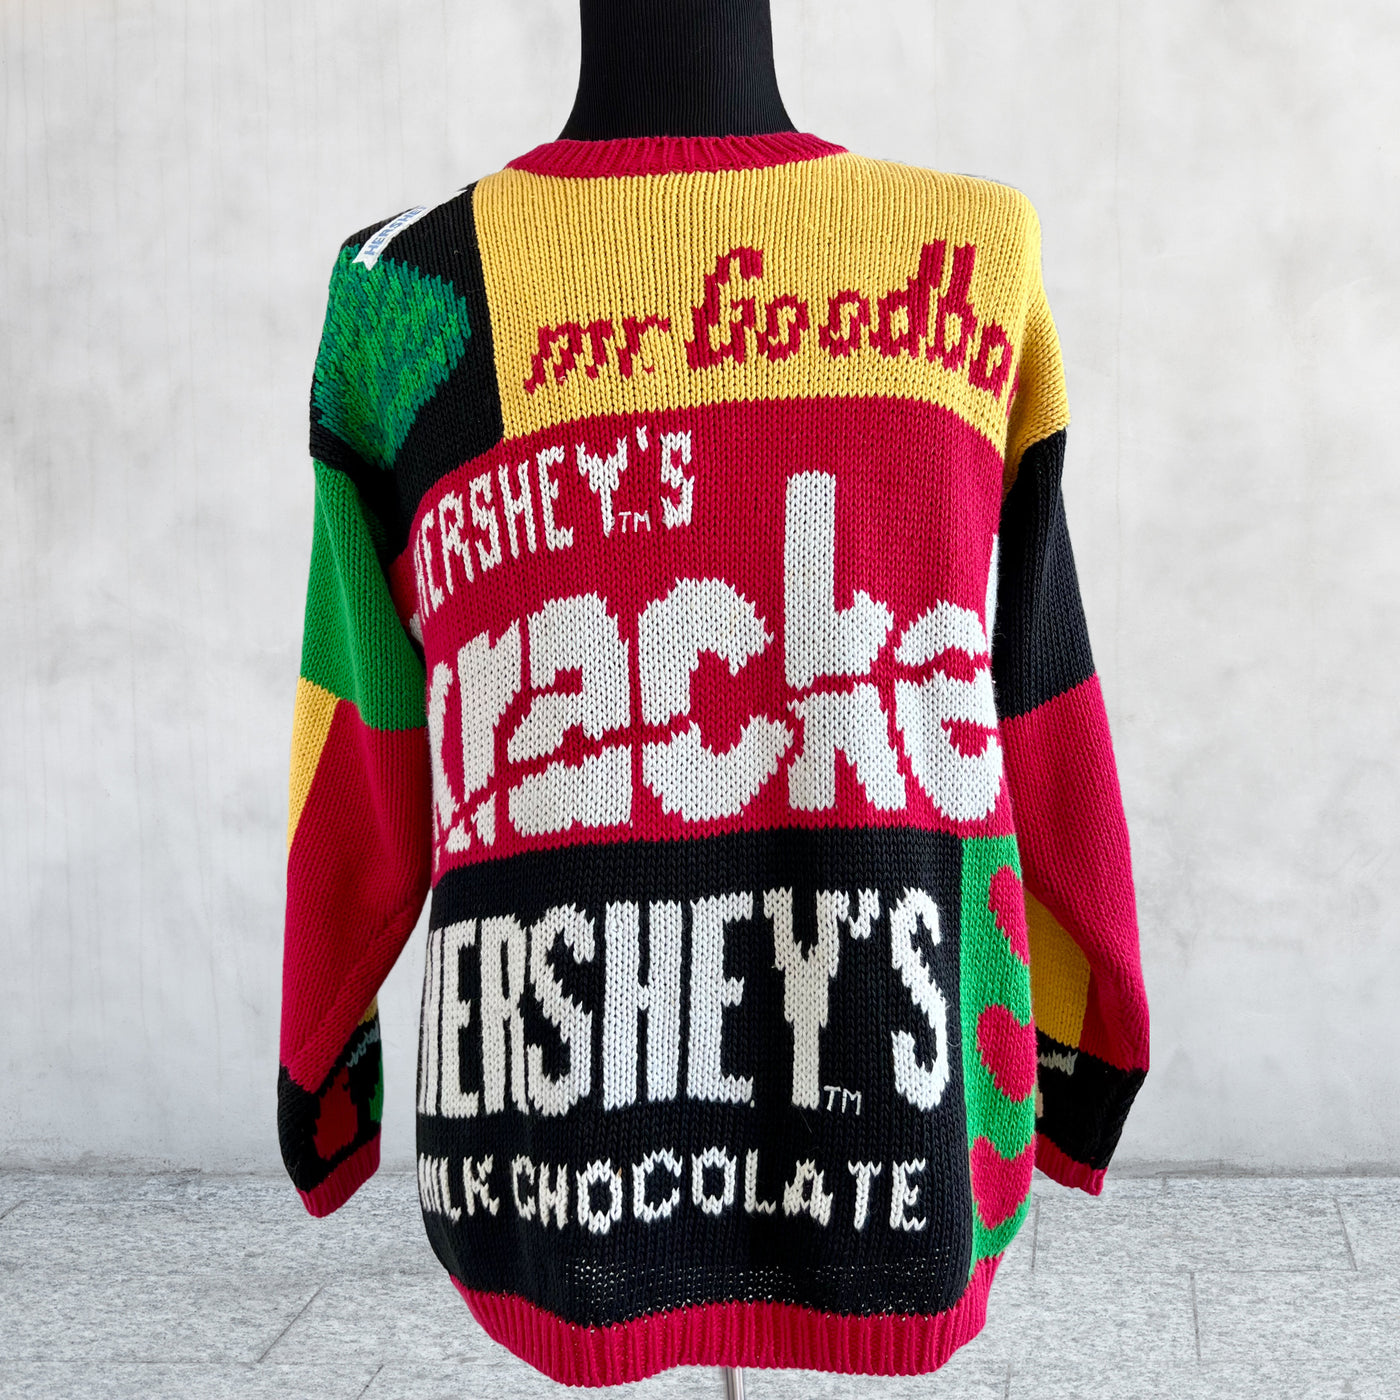 Rare Vintage Hershey's Chocolate Sweater by The Eagle's Eye. Large